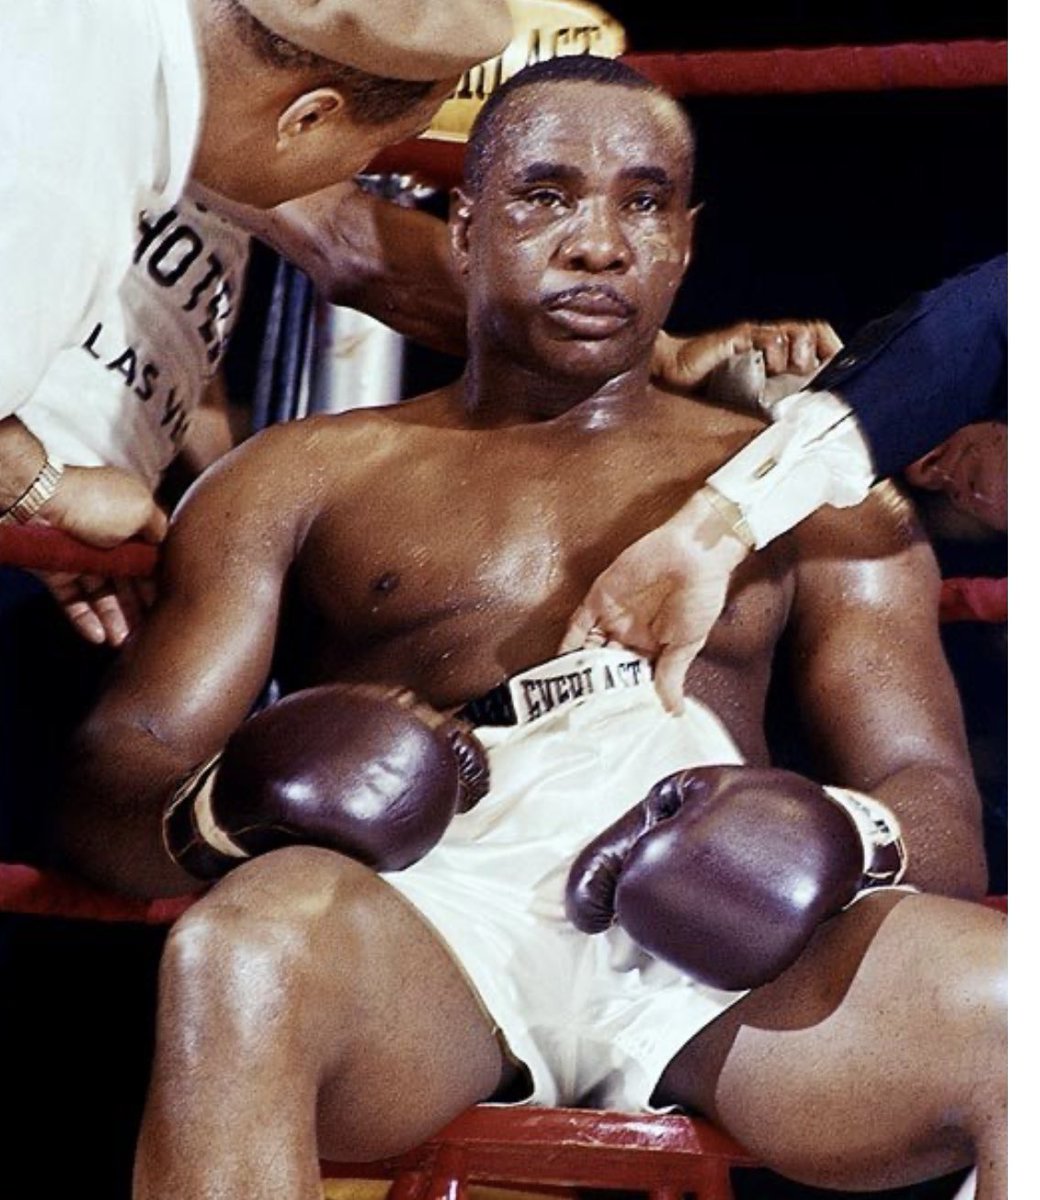 59 years ago today. We’ll never know what really happened. #ListonClay #SonnyListon